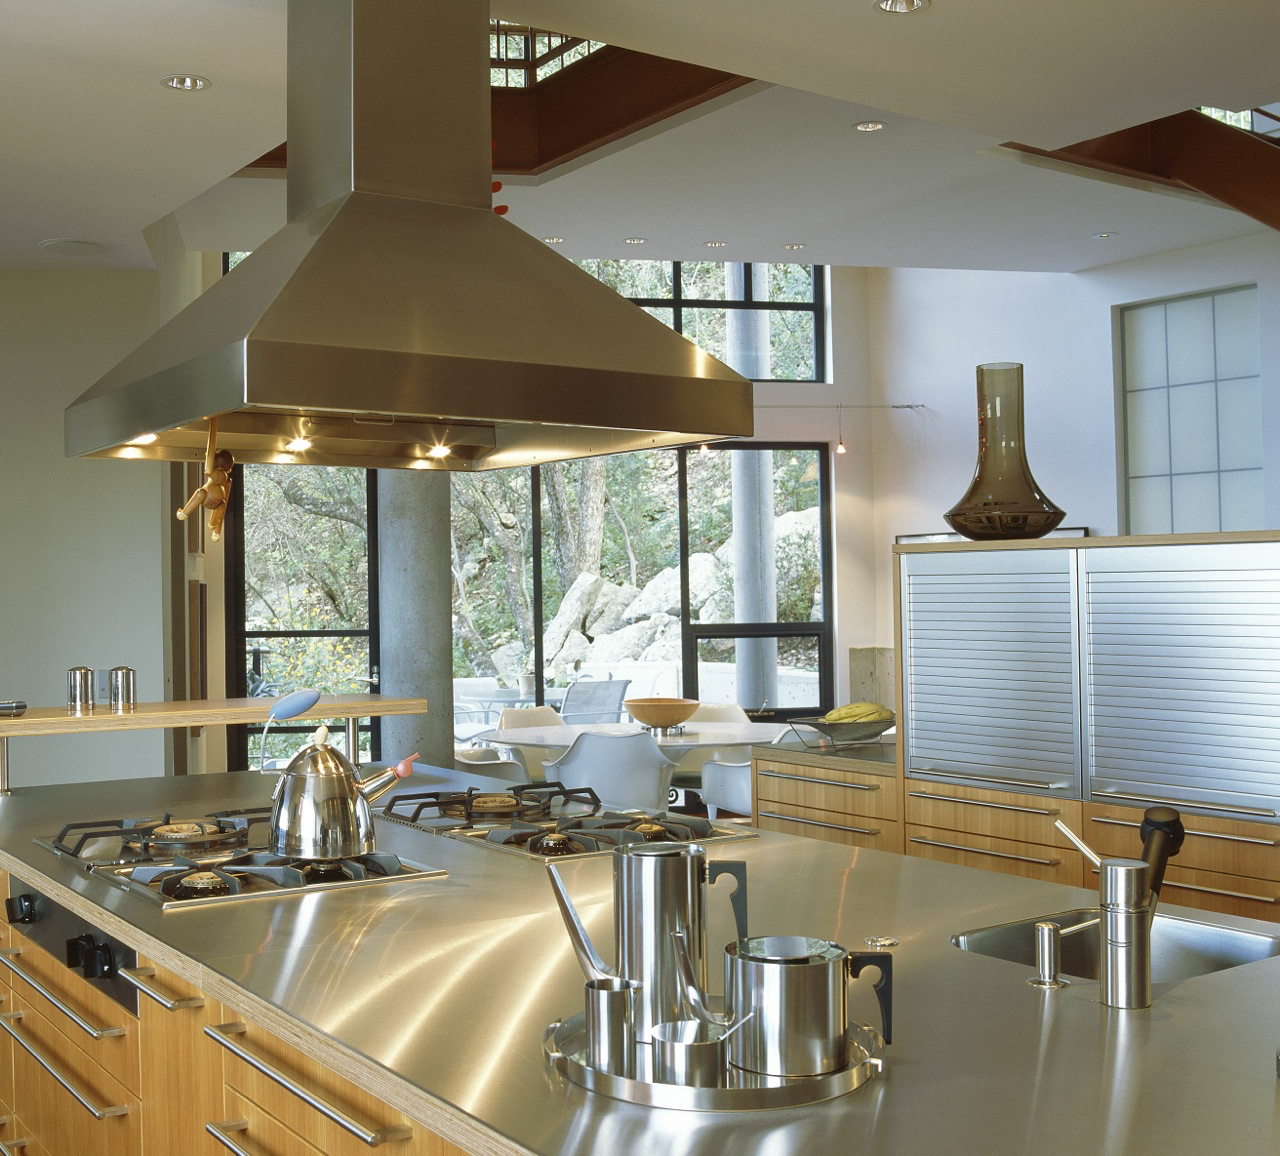 Bulthaup kitchen with stainless steel countertops.